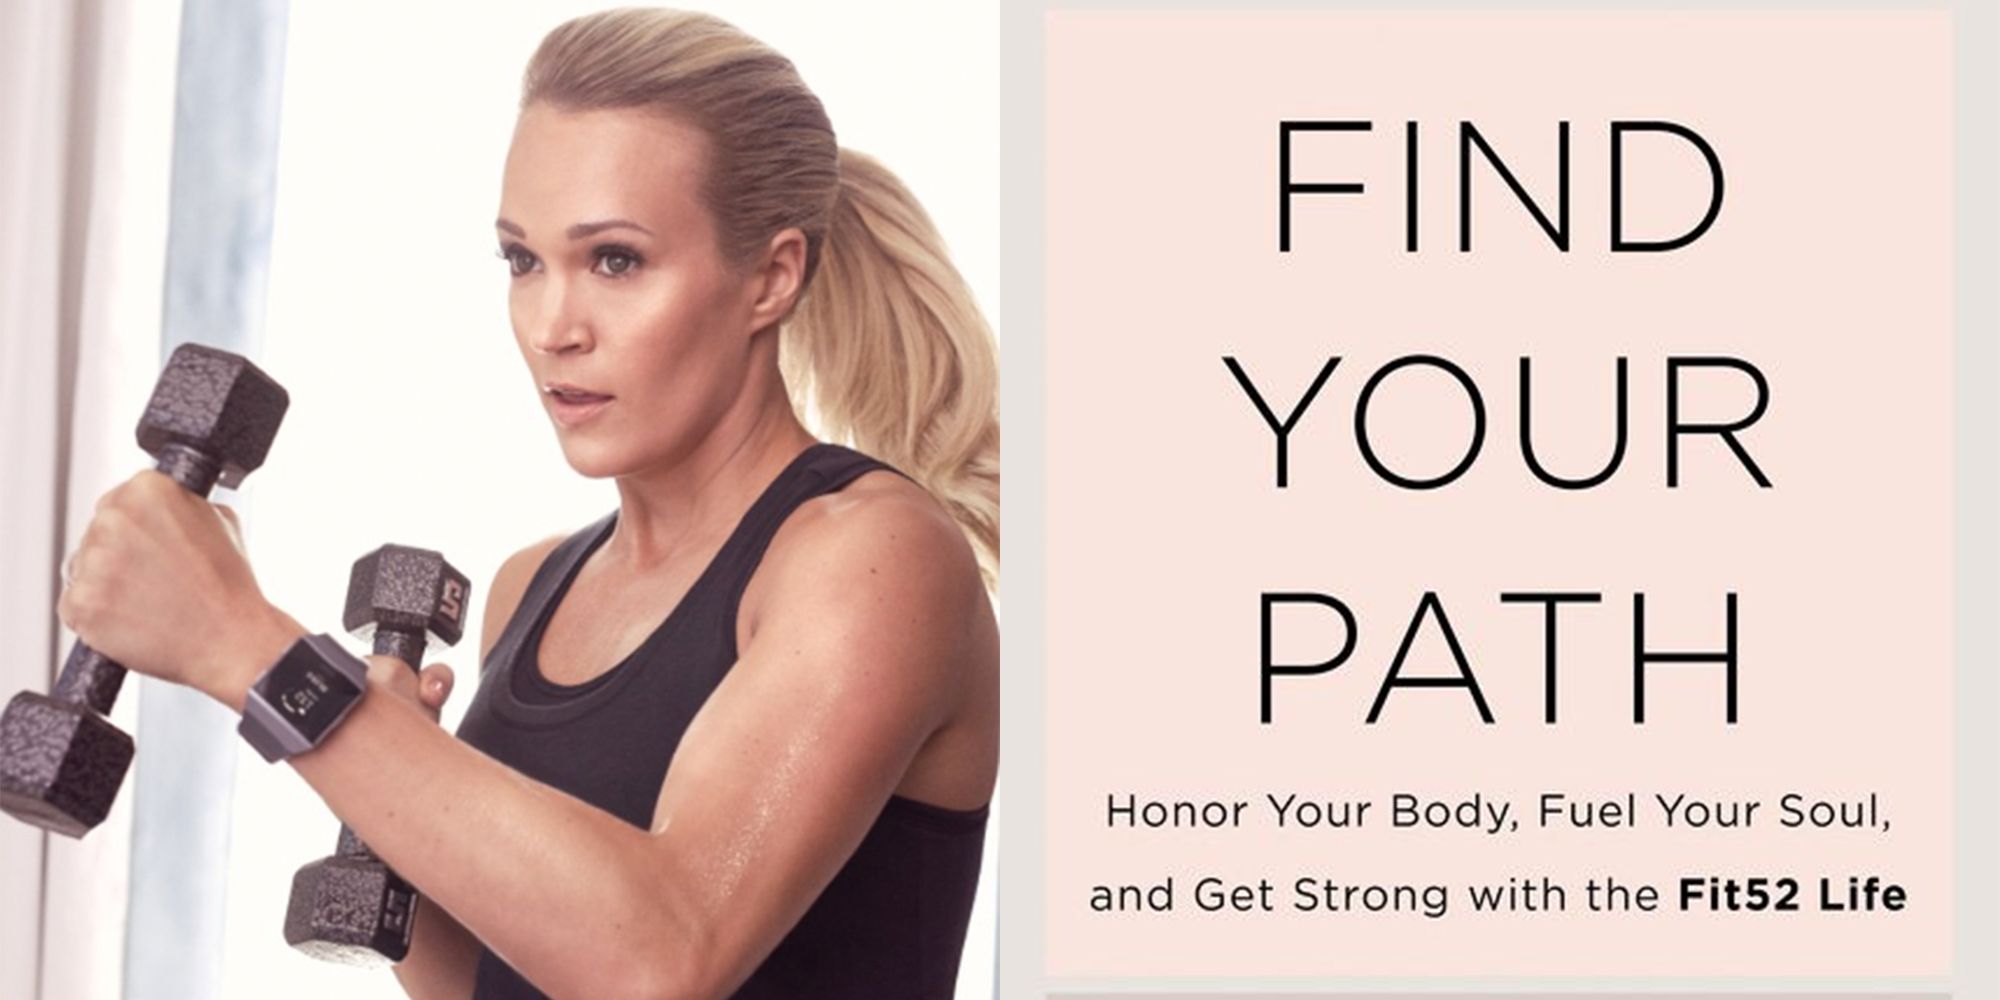 Carrie Underwood Fitness Book - Find Your Path Release Date, Info